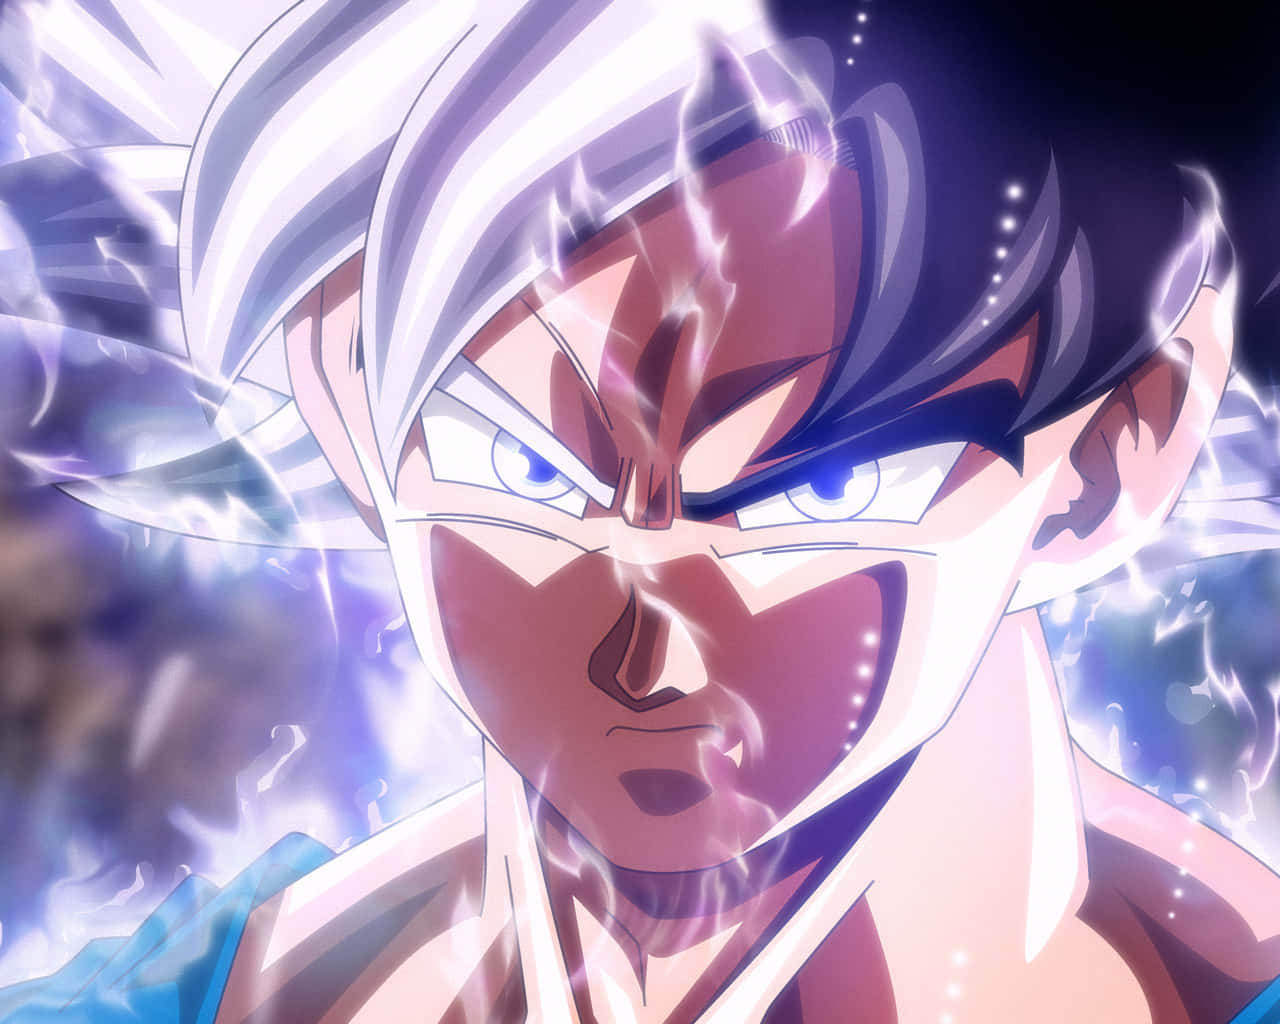 Unlock the power of Ultra Instinct to become an unbeatable warrior